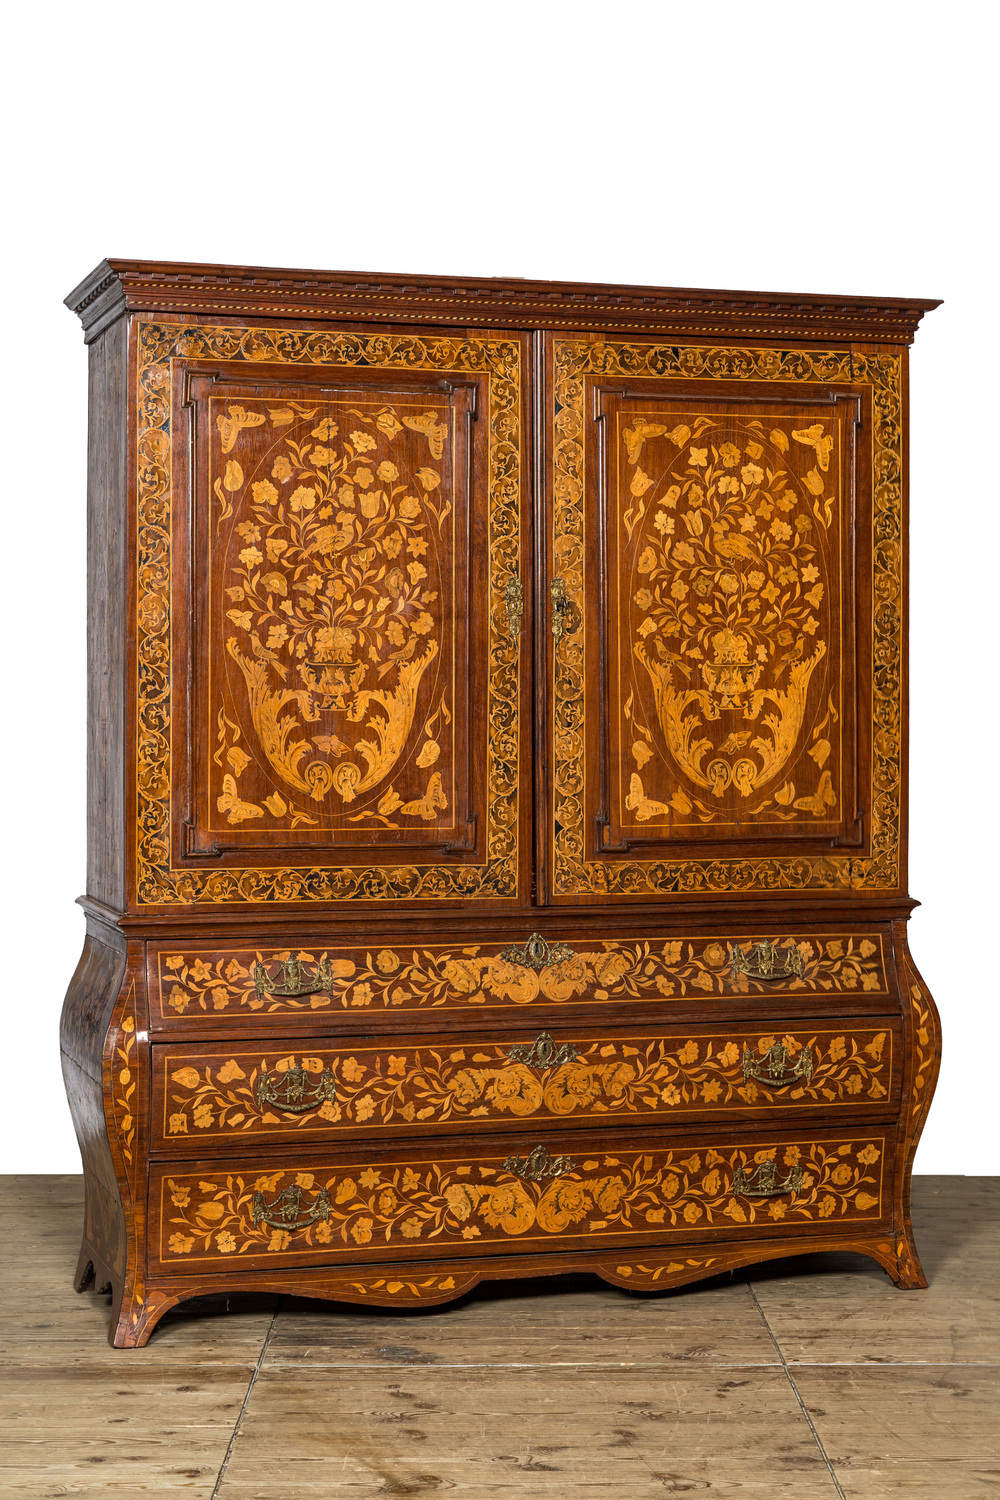 A Dutch mahogany floral marquetry cabinet with two doors and three drawers, 18/19th C.